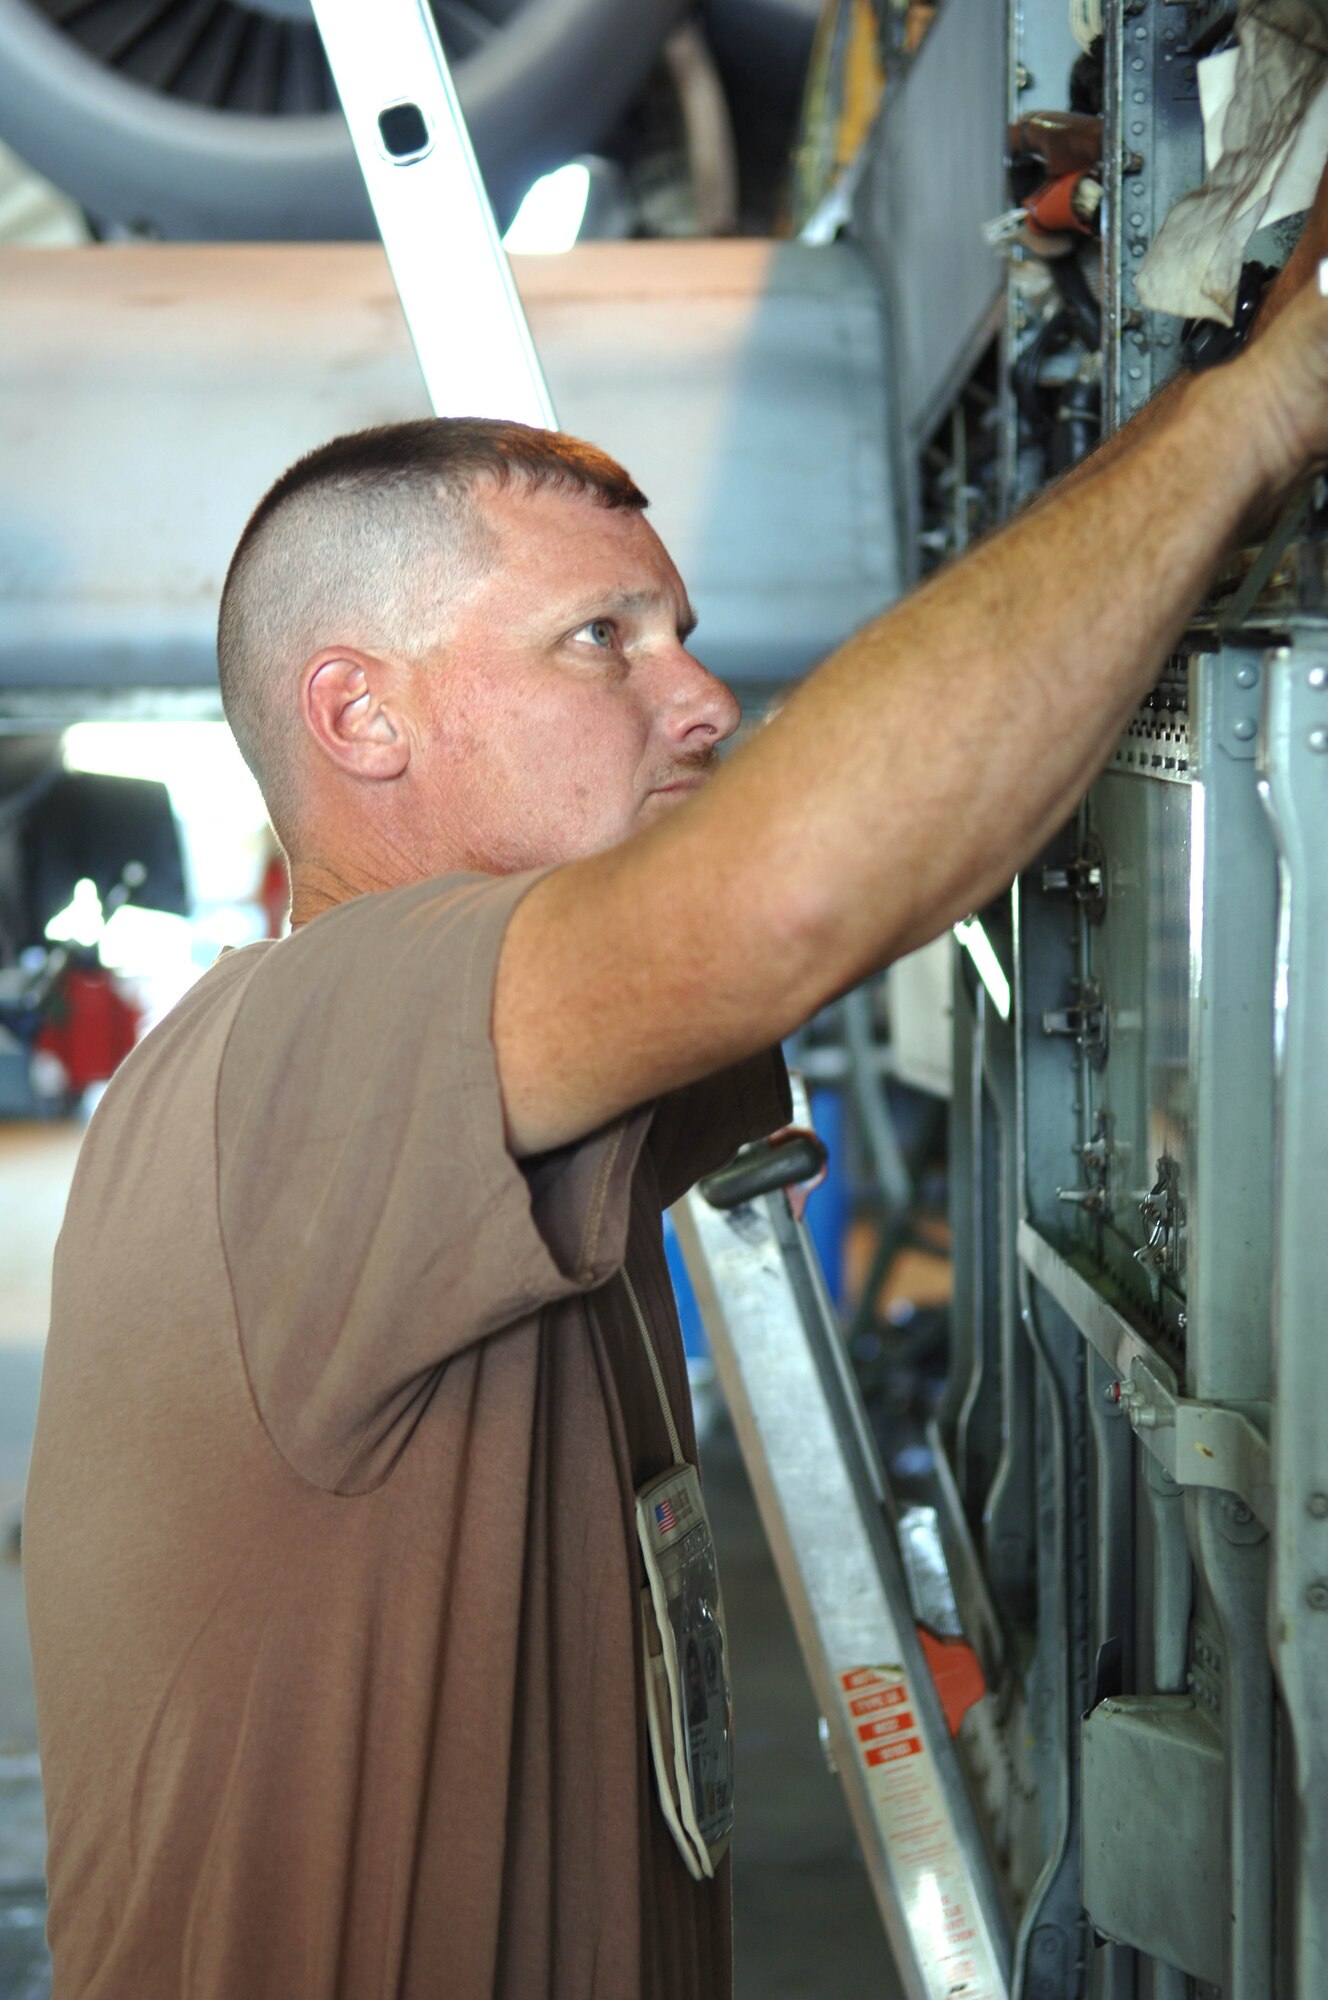 Staff Sergeant Daniel Boughton, 455th Expeditionary Maintenance Squadron, works on the avionics section of an A-10 Thunderbolt II, often called the "Warthog" by pilots and maintainers alike.  The aircraft was going through an extended maintenance overhaul before being returned to the line. (U.S. Air Force photo/Tech. Sgt. Joseph Kapinos)